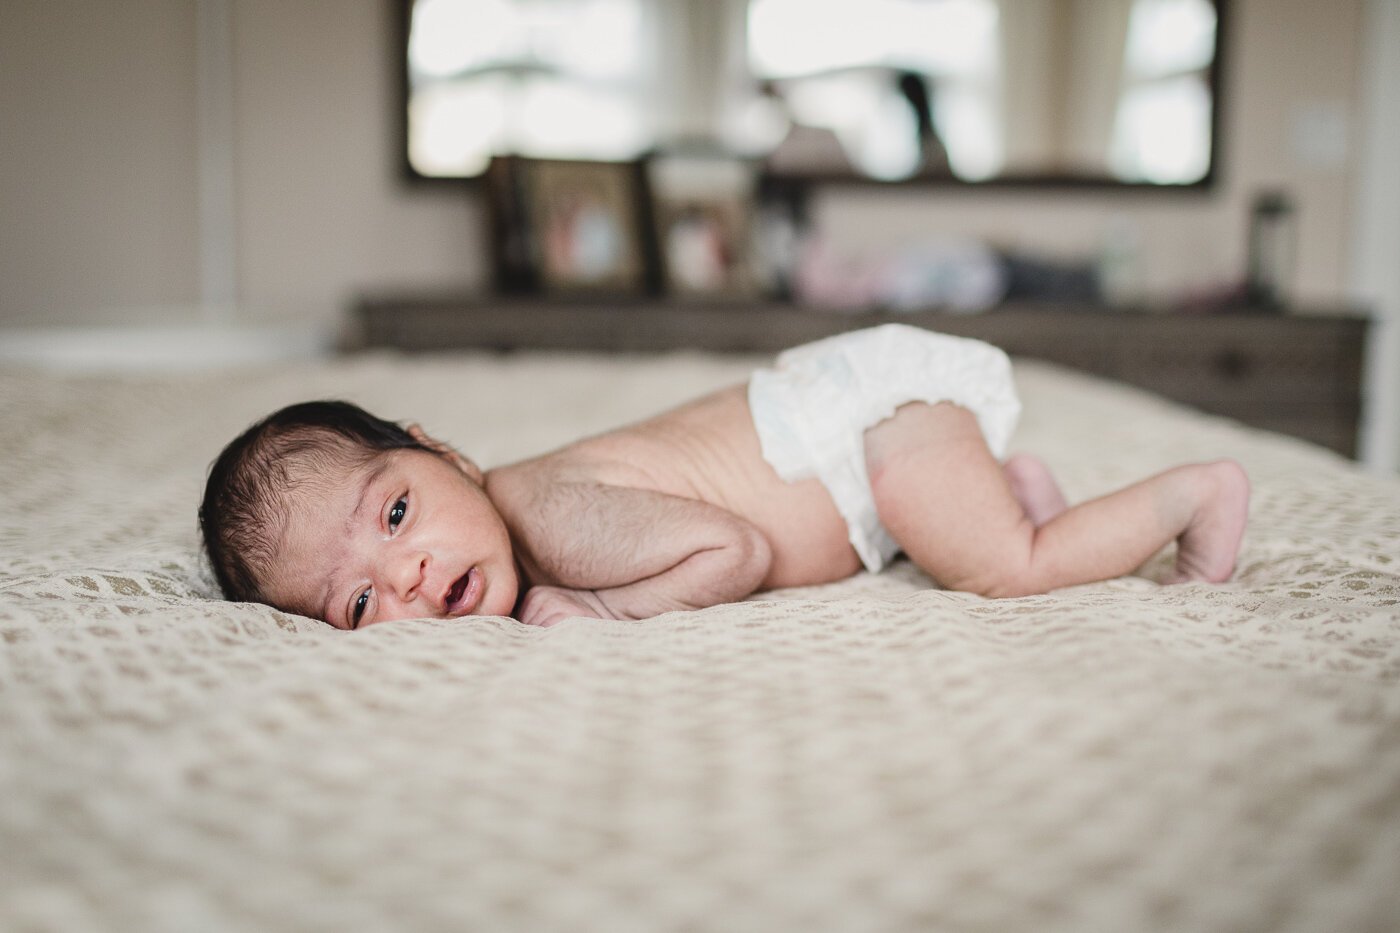 Newborn home phtotography session by Allison Busch Photography